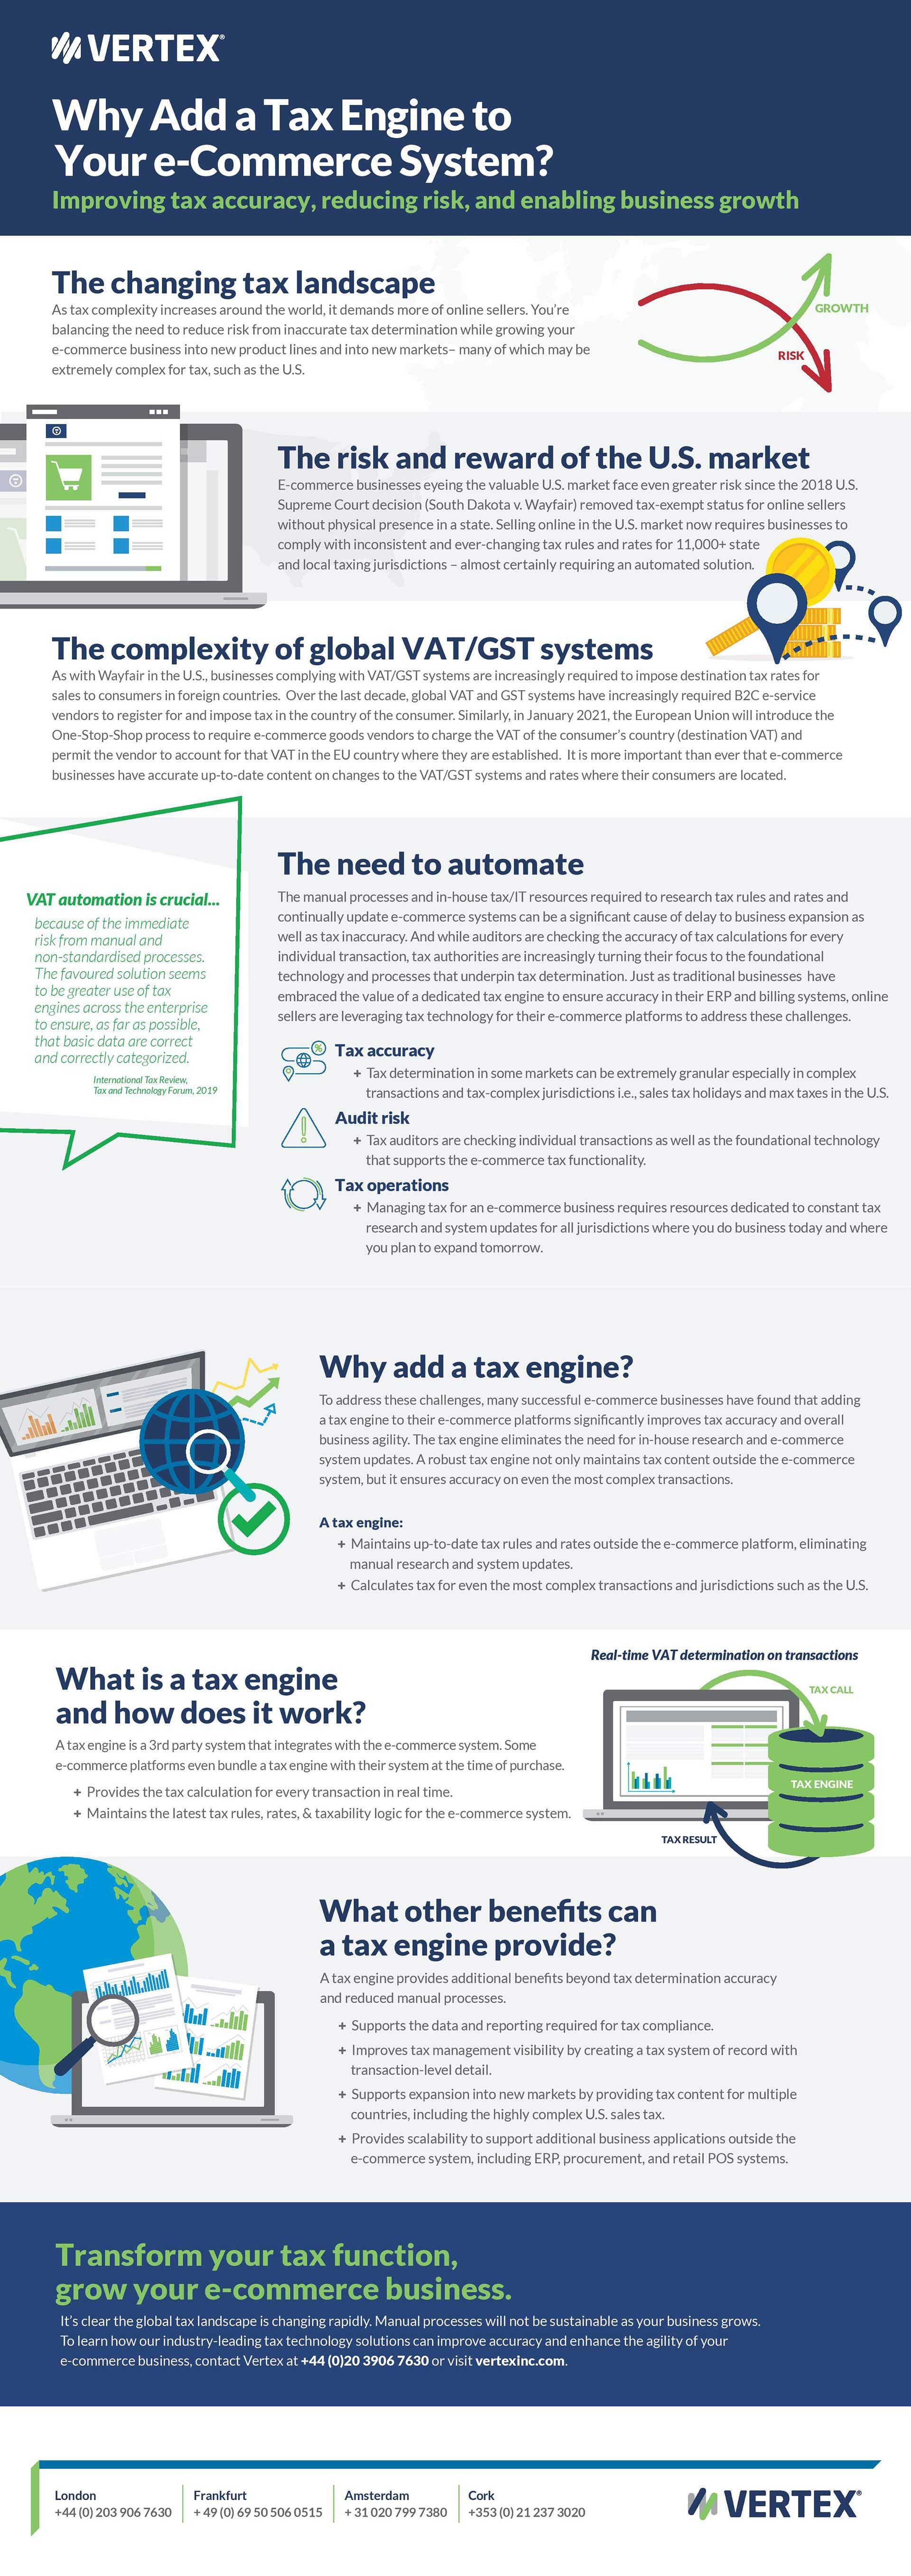 Why Add a tax Engine to your e-commerce system